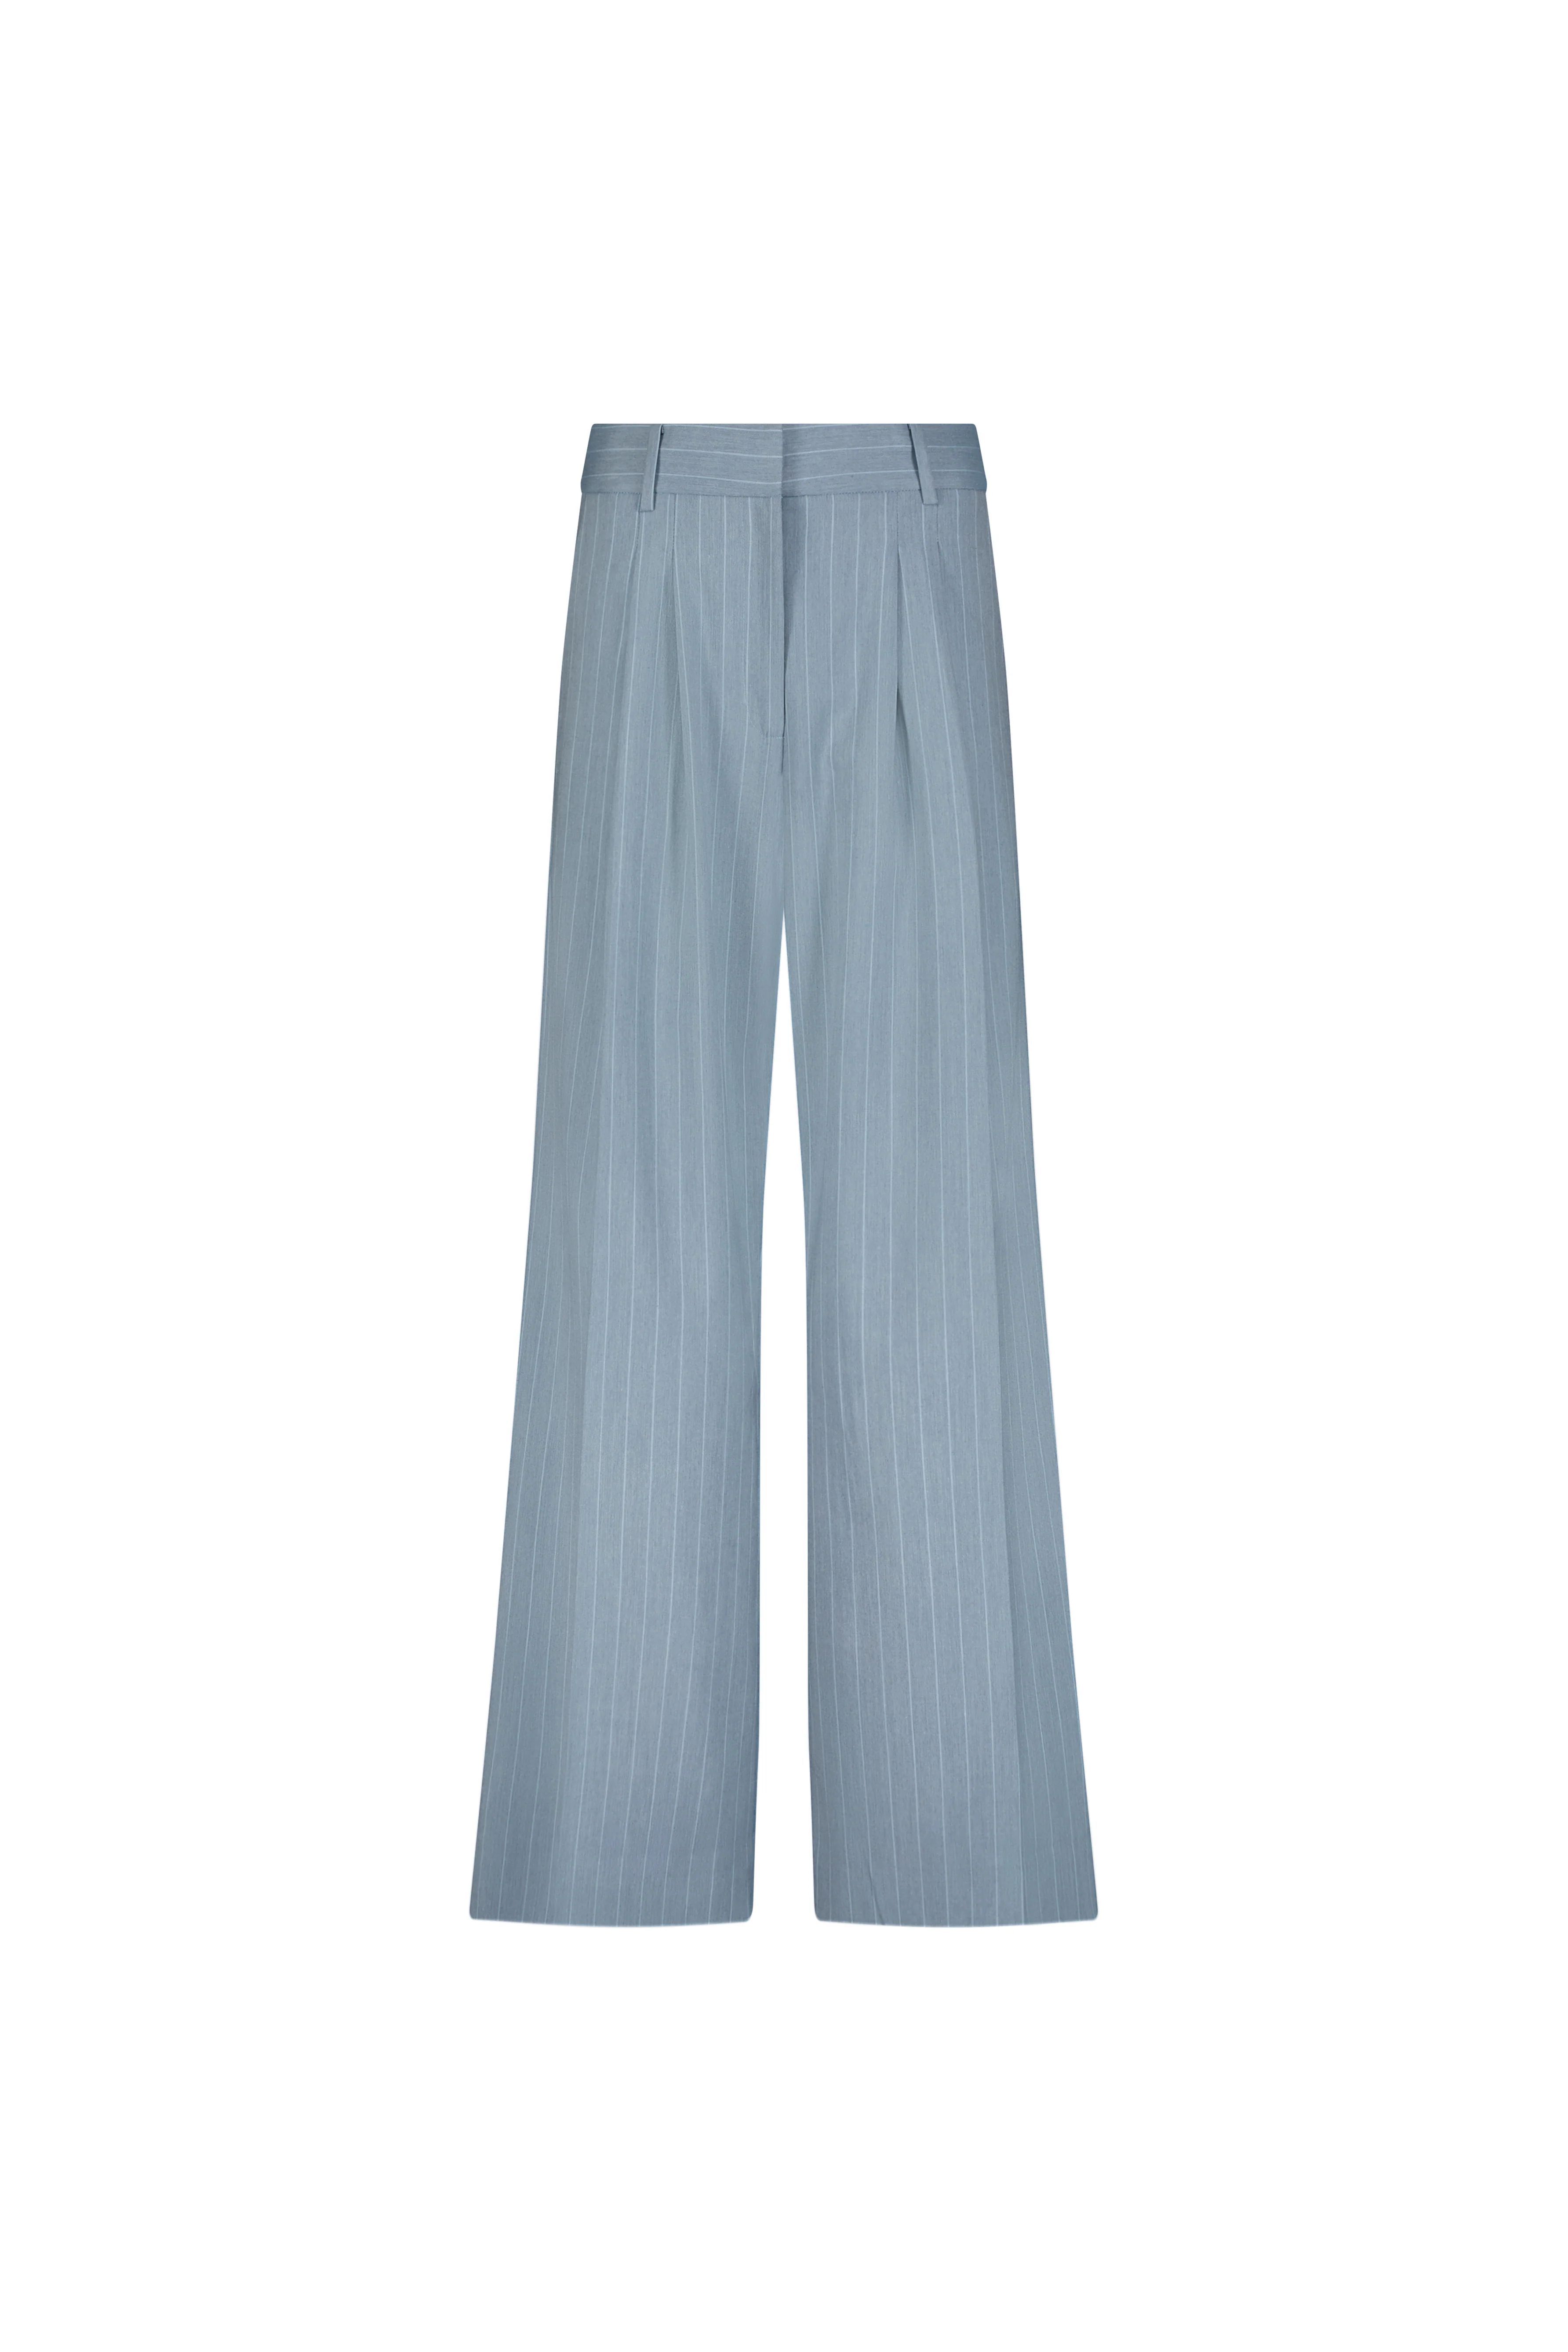 Striped Wide Leg Trousers | MAYSON the label